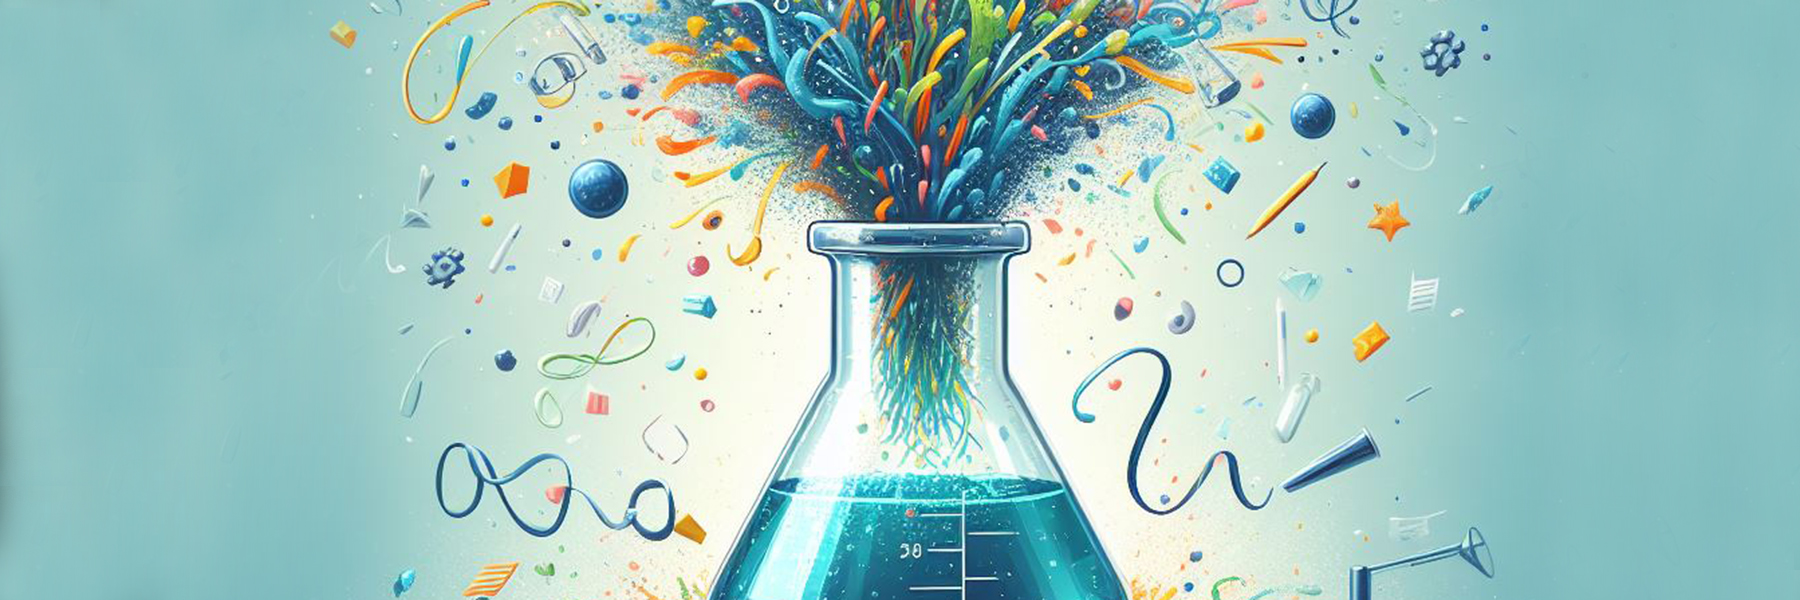 science beaker exploding with confetti BANNER